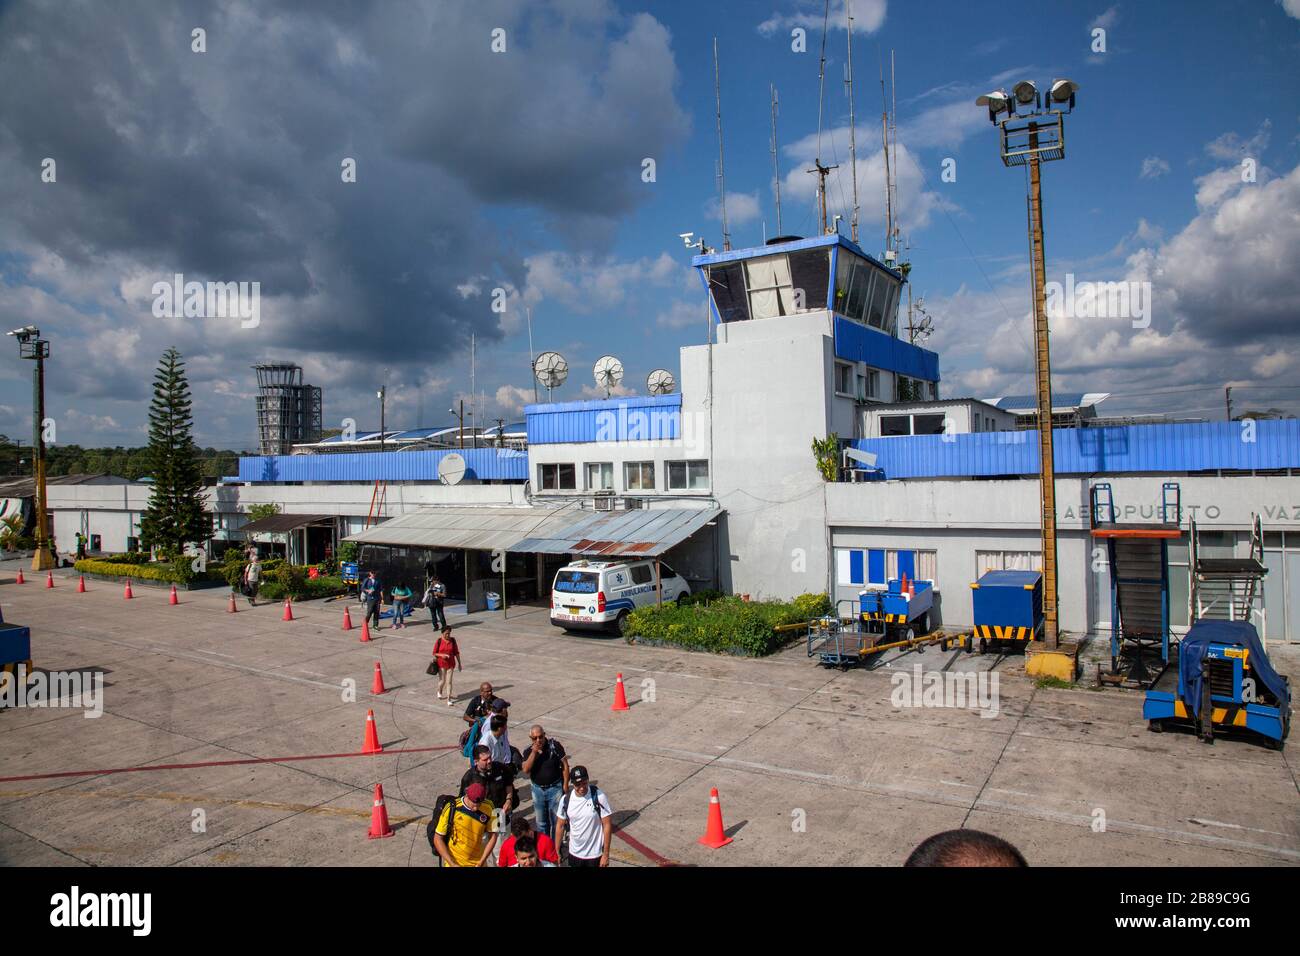 Leticia old airport terminal in the Amazon,Colombia, South America. Stock Photo